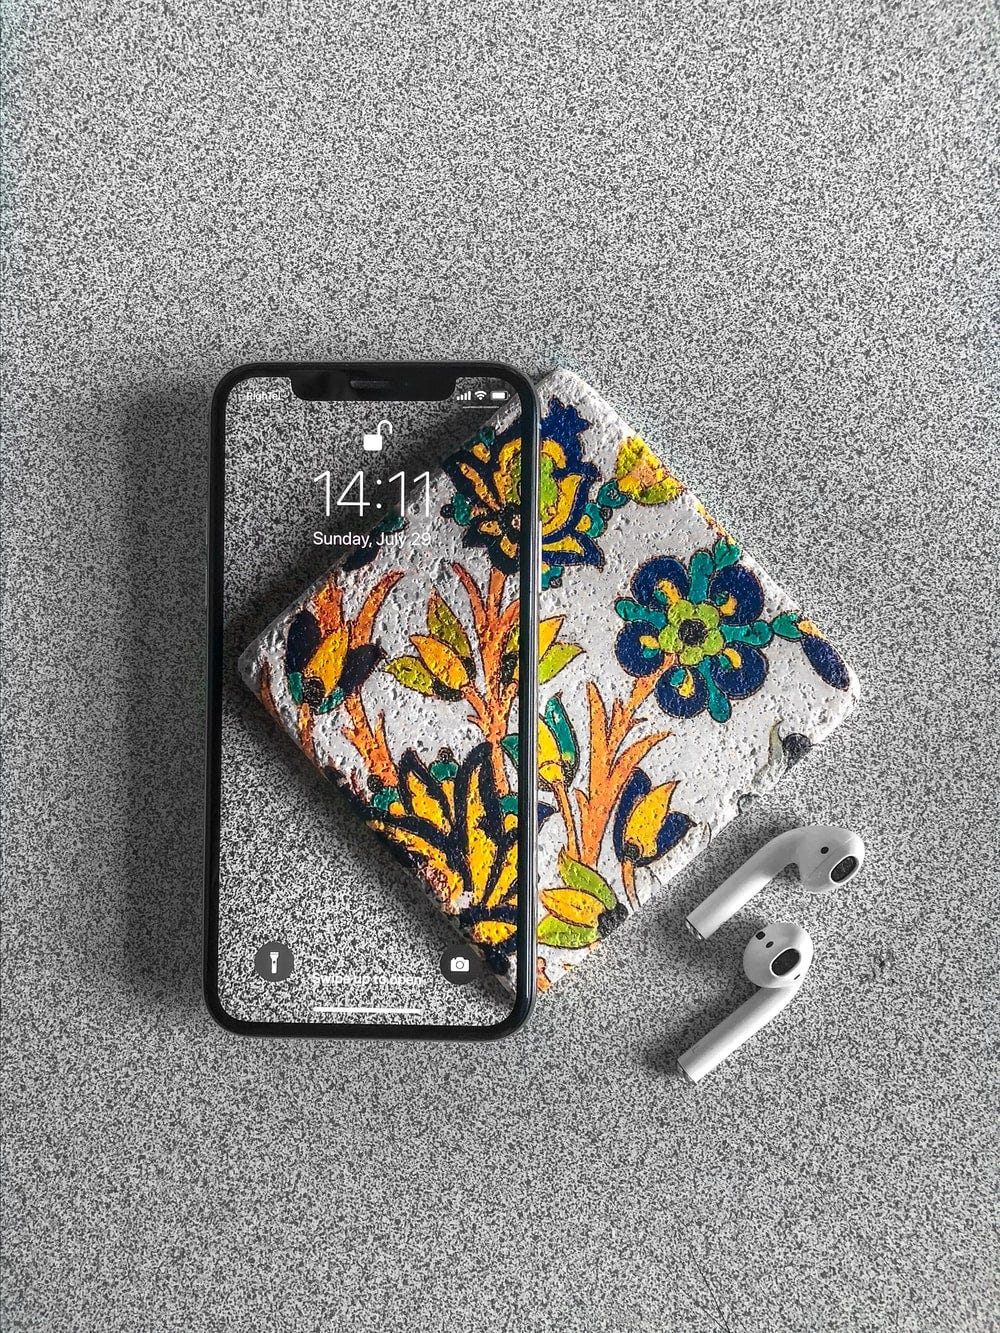 Space Gray iPhone X photo